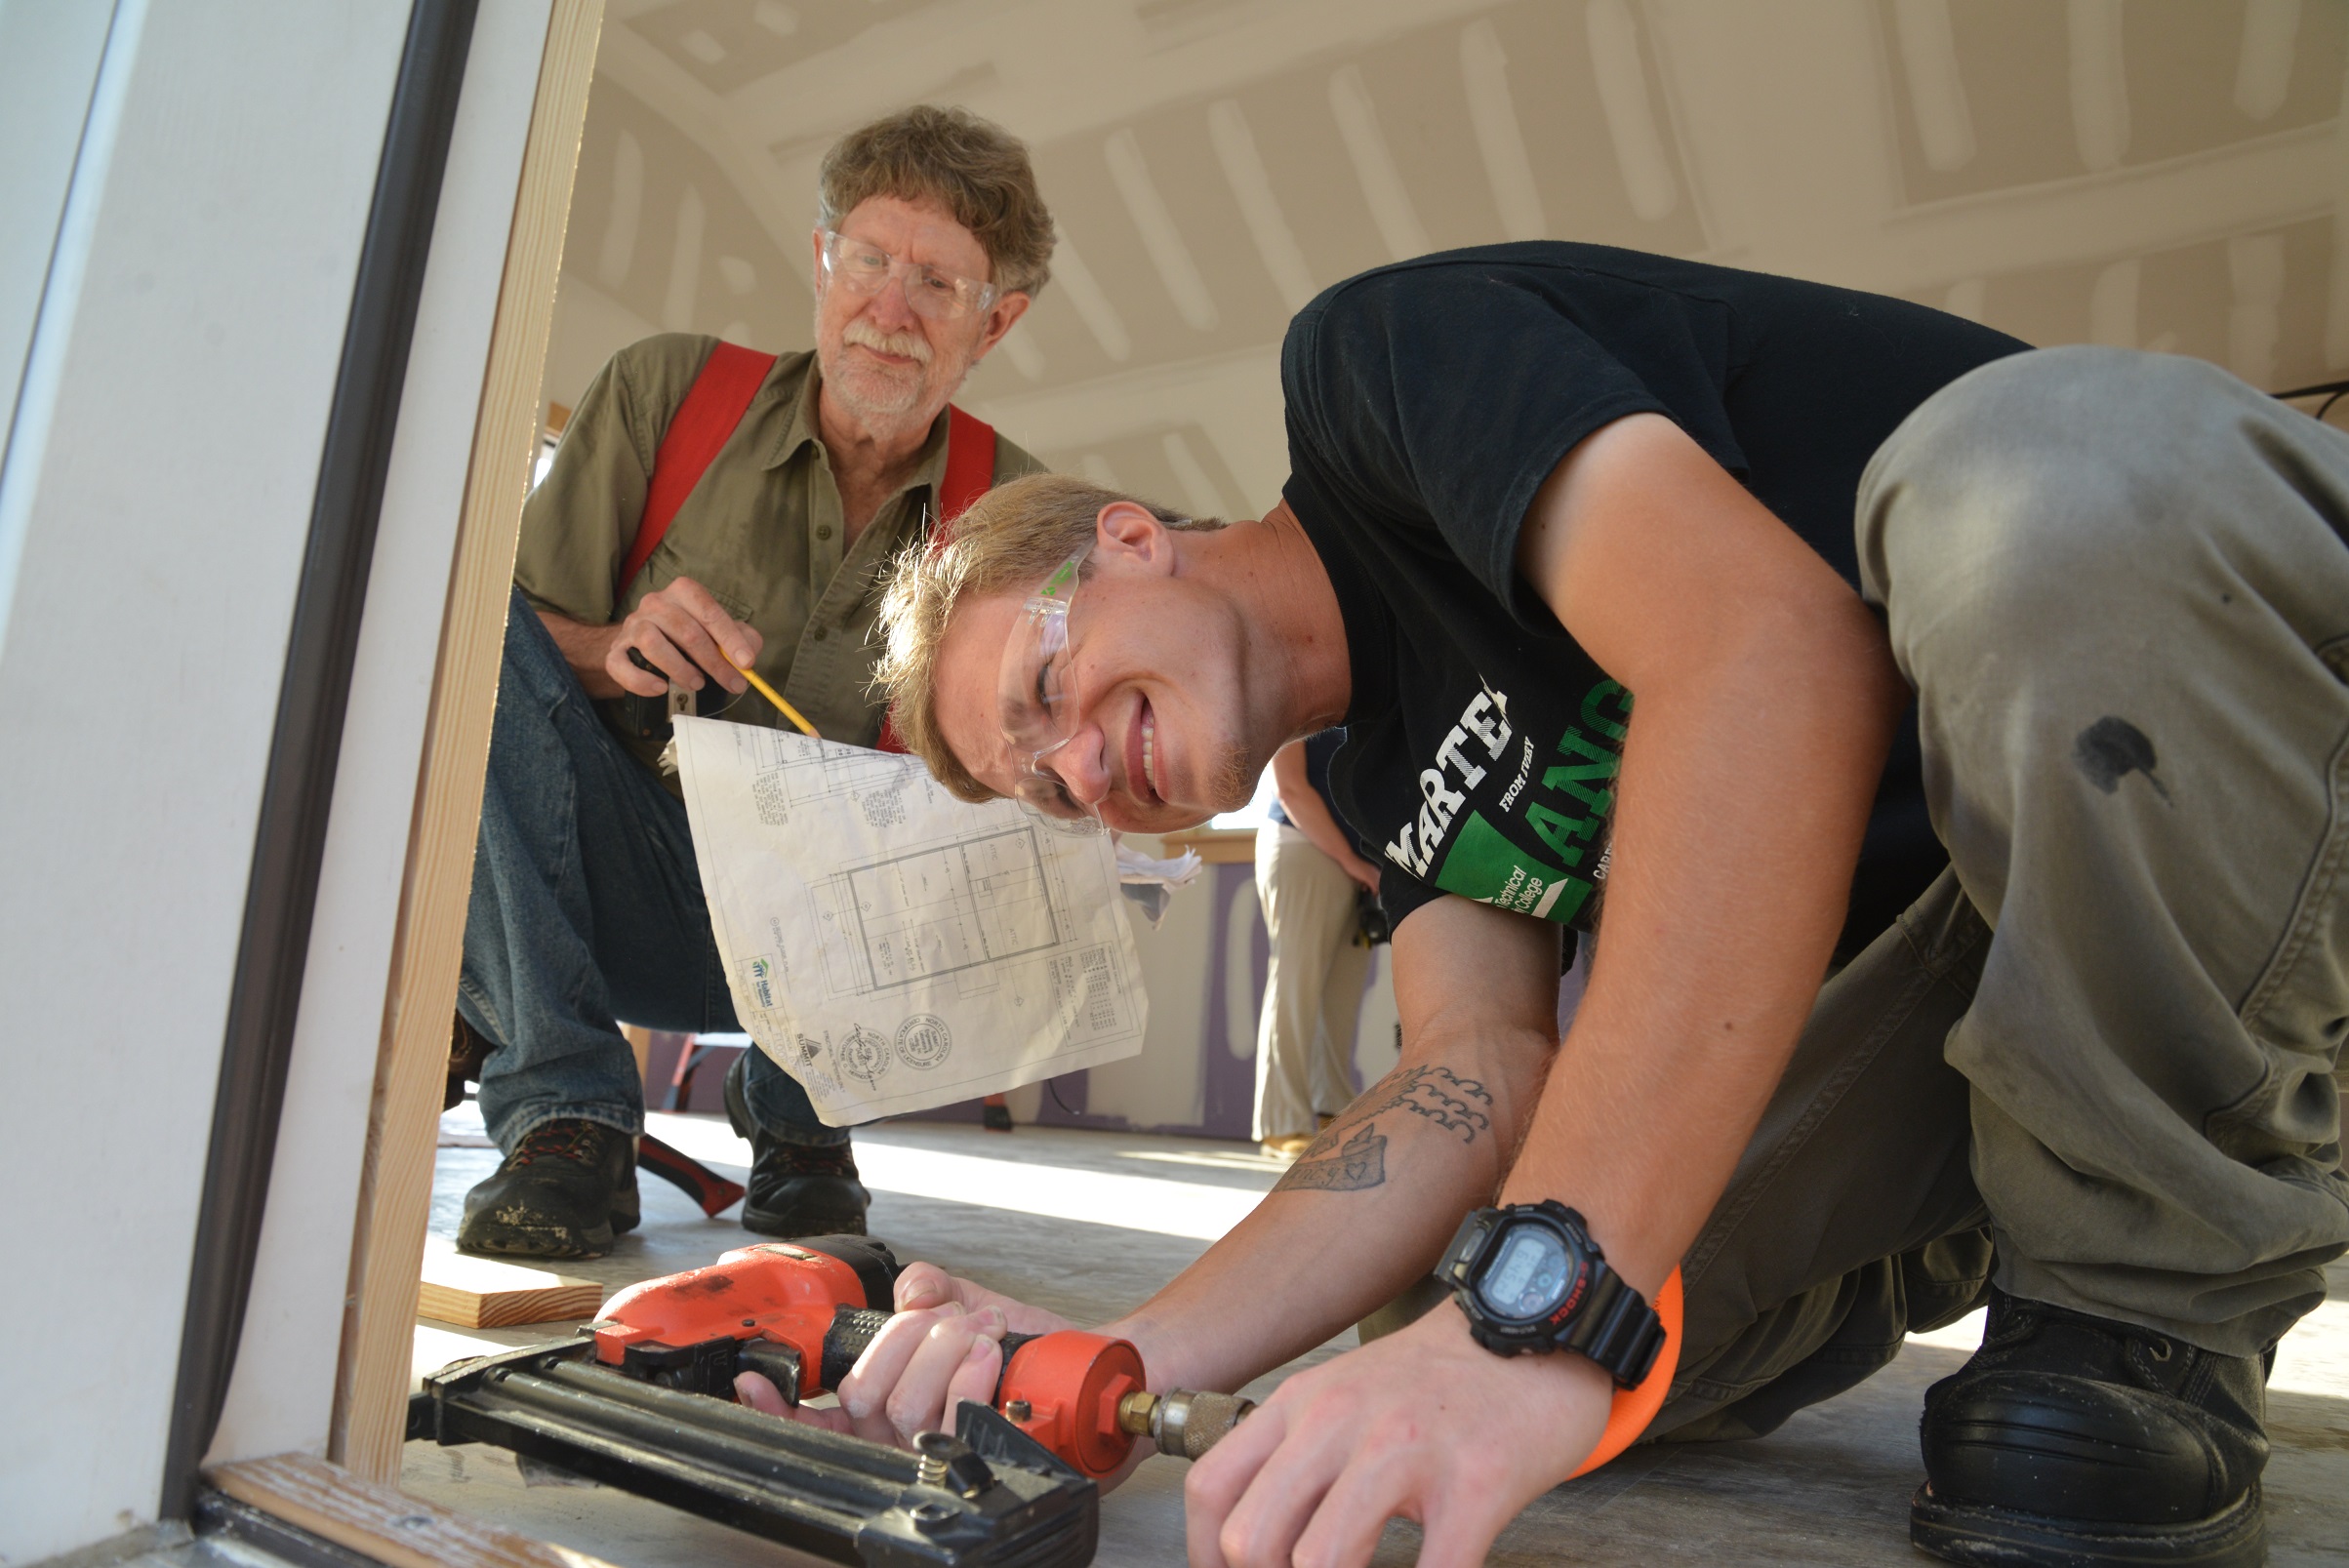 student leaning over using nail gun and another student looking over shoulder